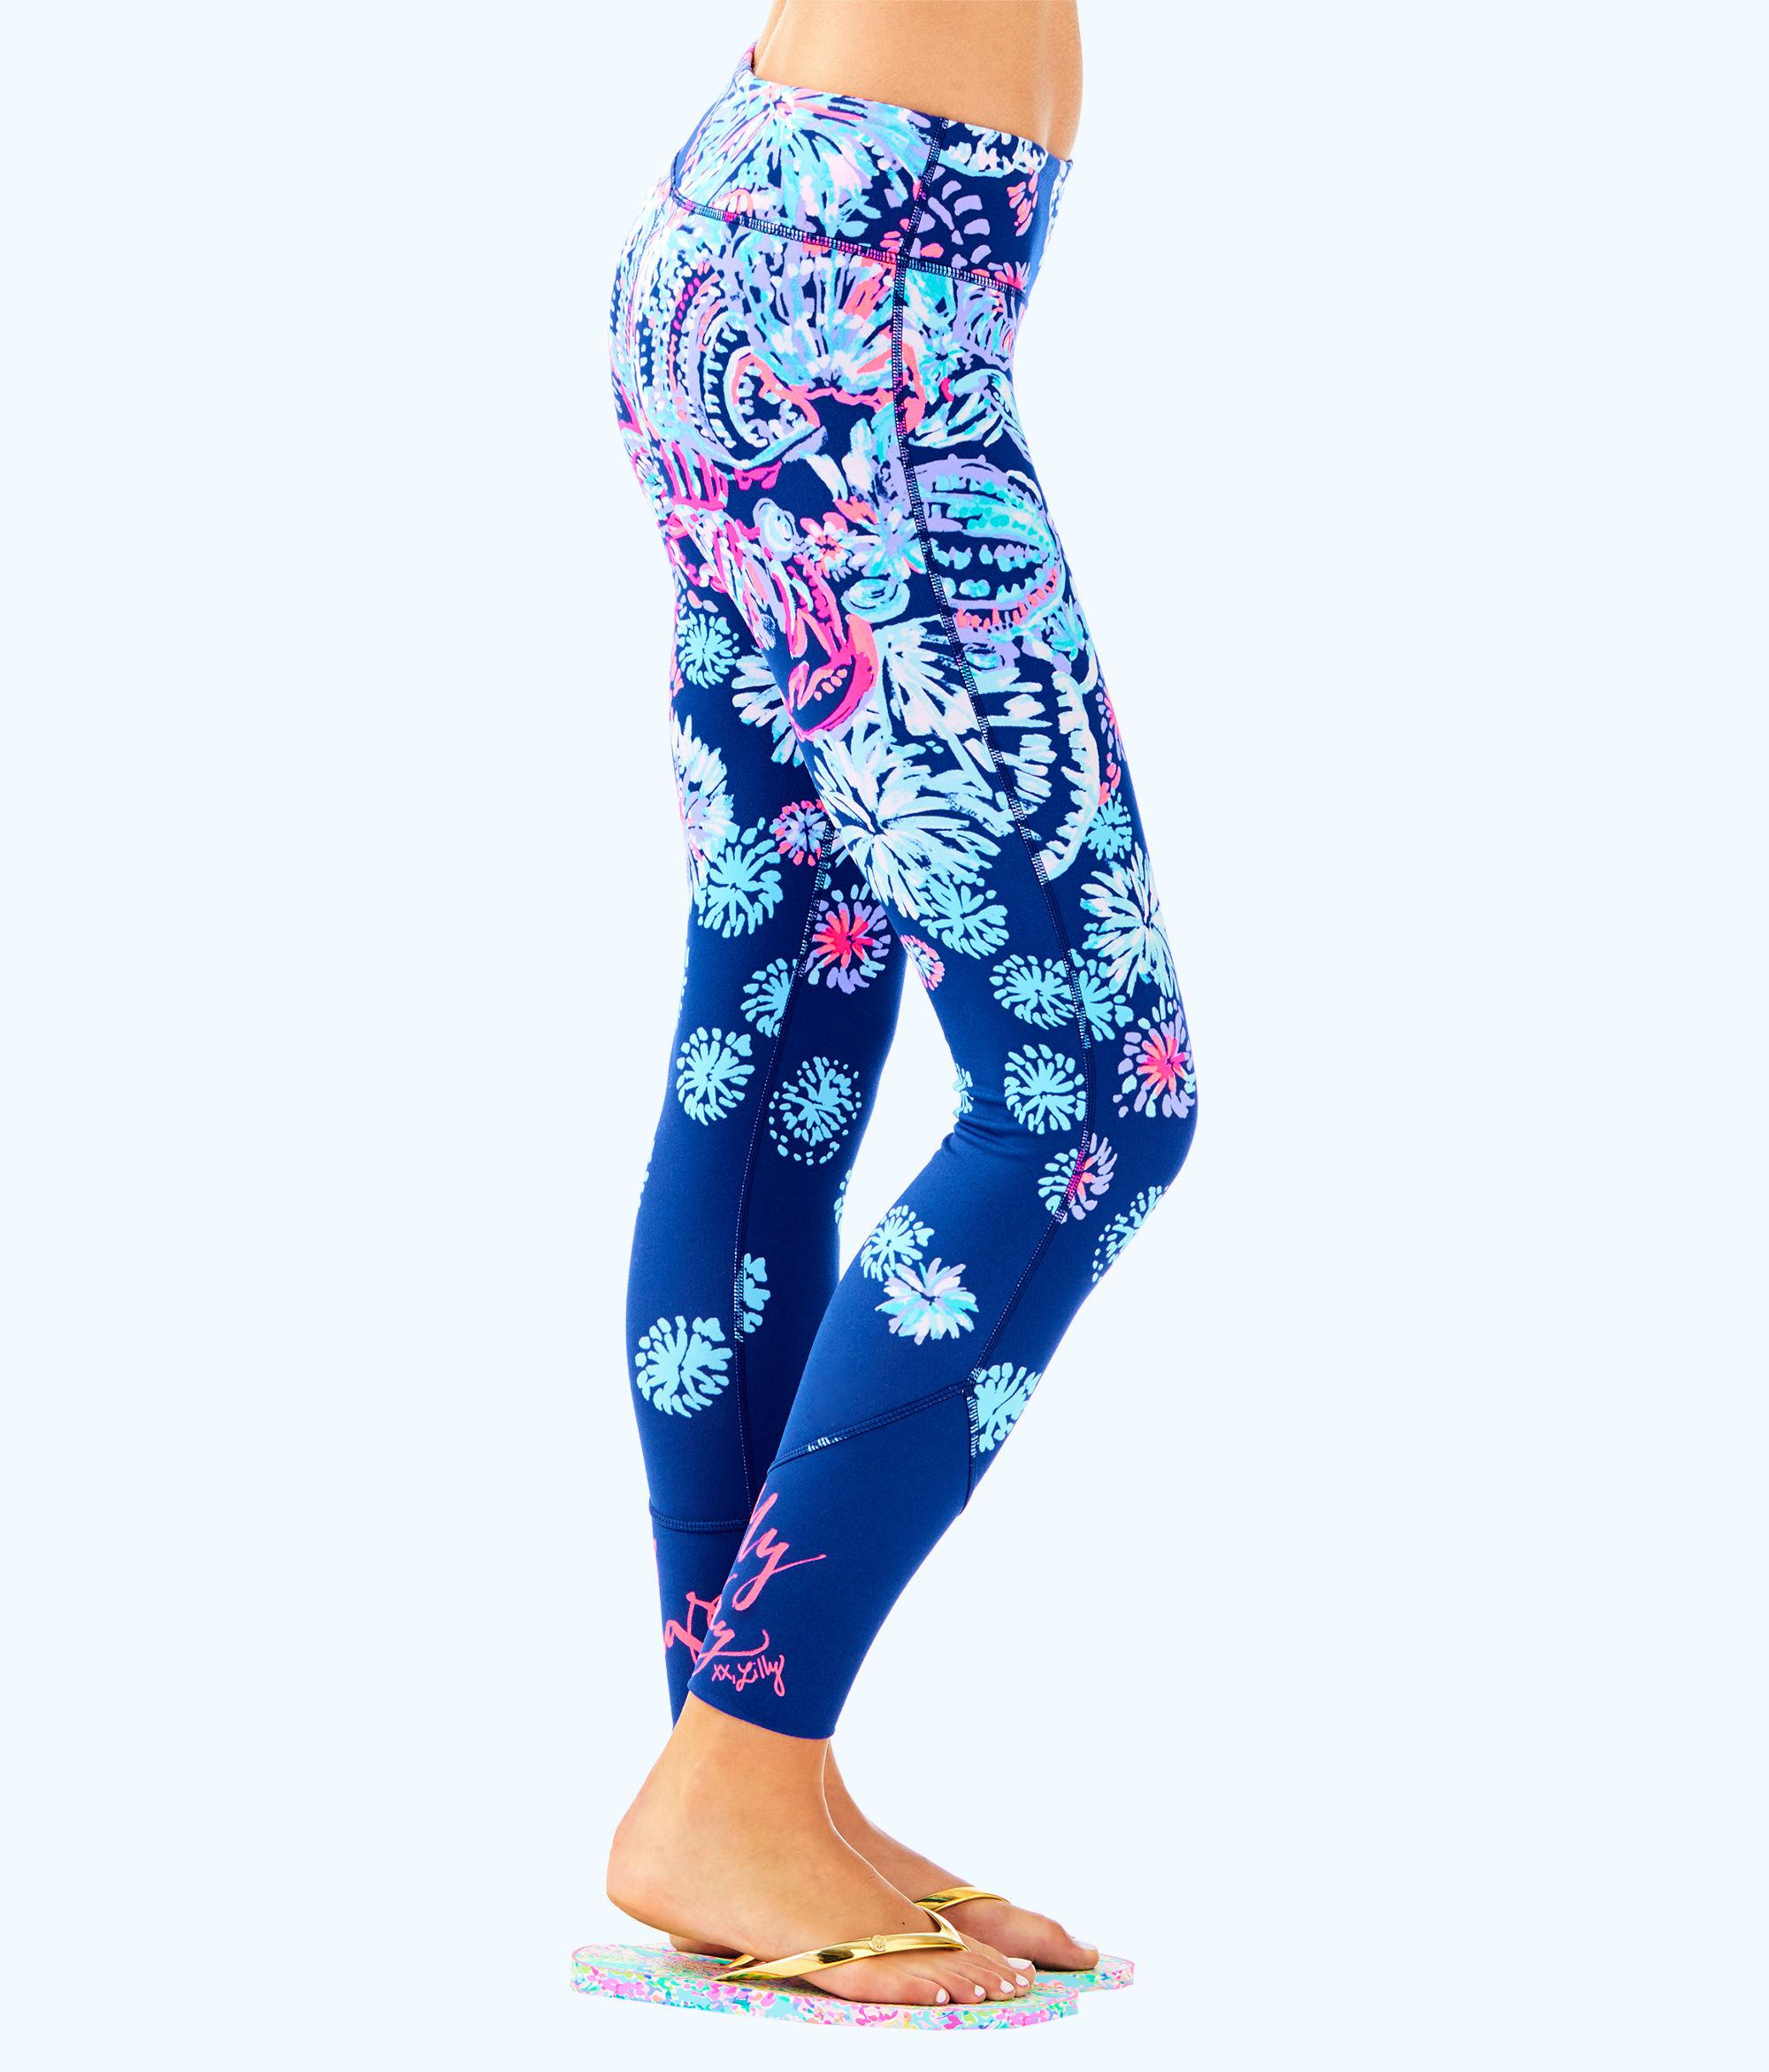 Lilly Pulitzer Girls Leggings Flash Sales, 50% OFF 